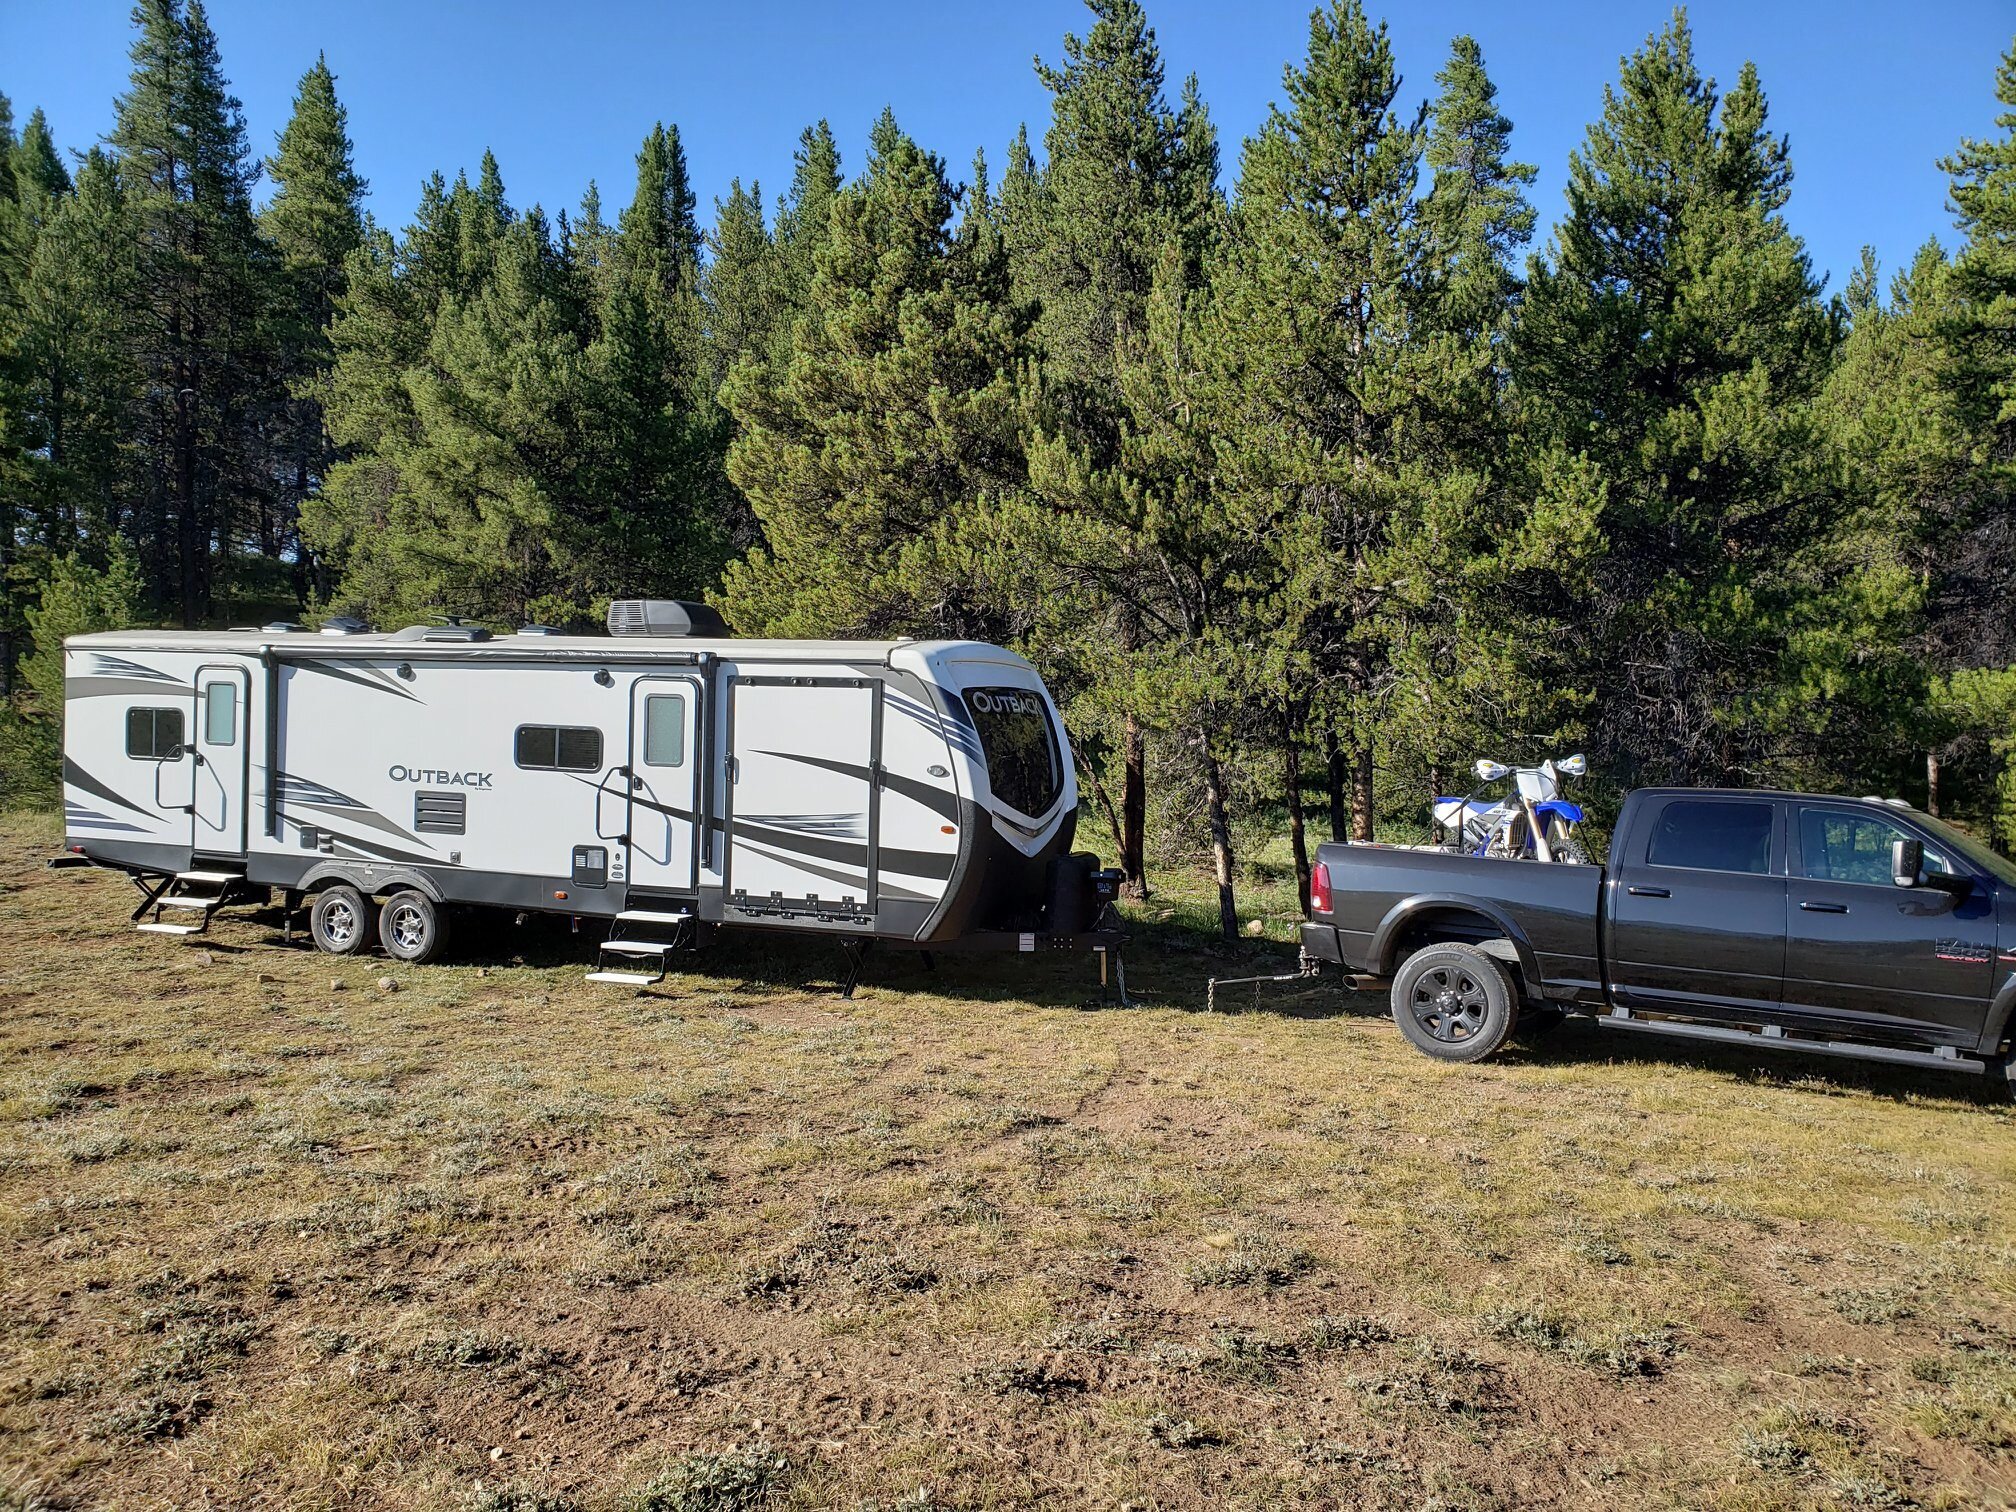 Easy camping access for large trailers